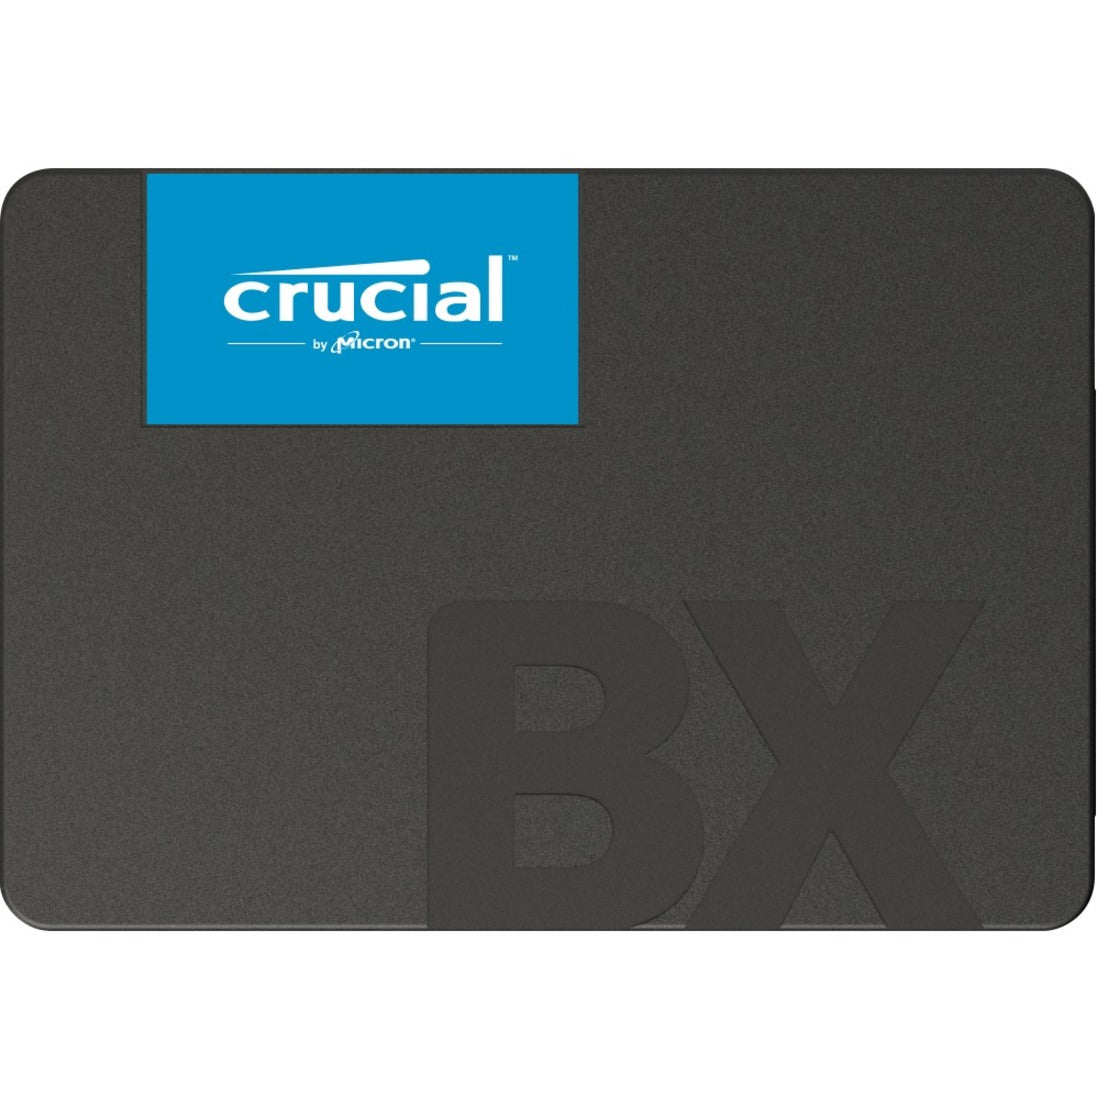 Crucial CT1000BX500SSD1 BX500 1TB 3D NAND SATA 2.5-inch SSD, High Performance Storage Solution